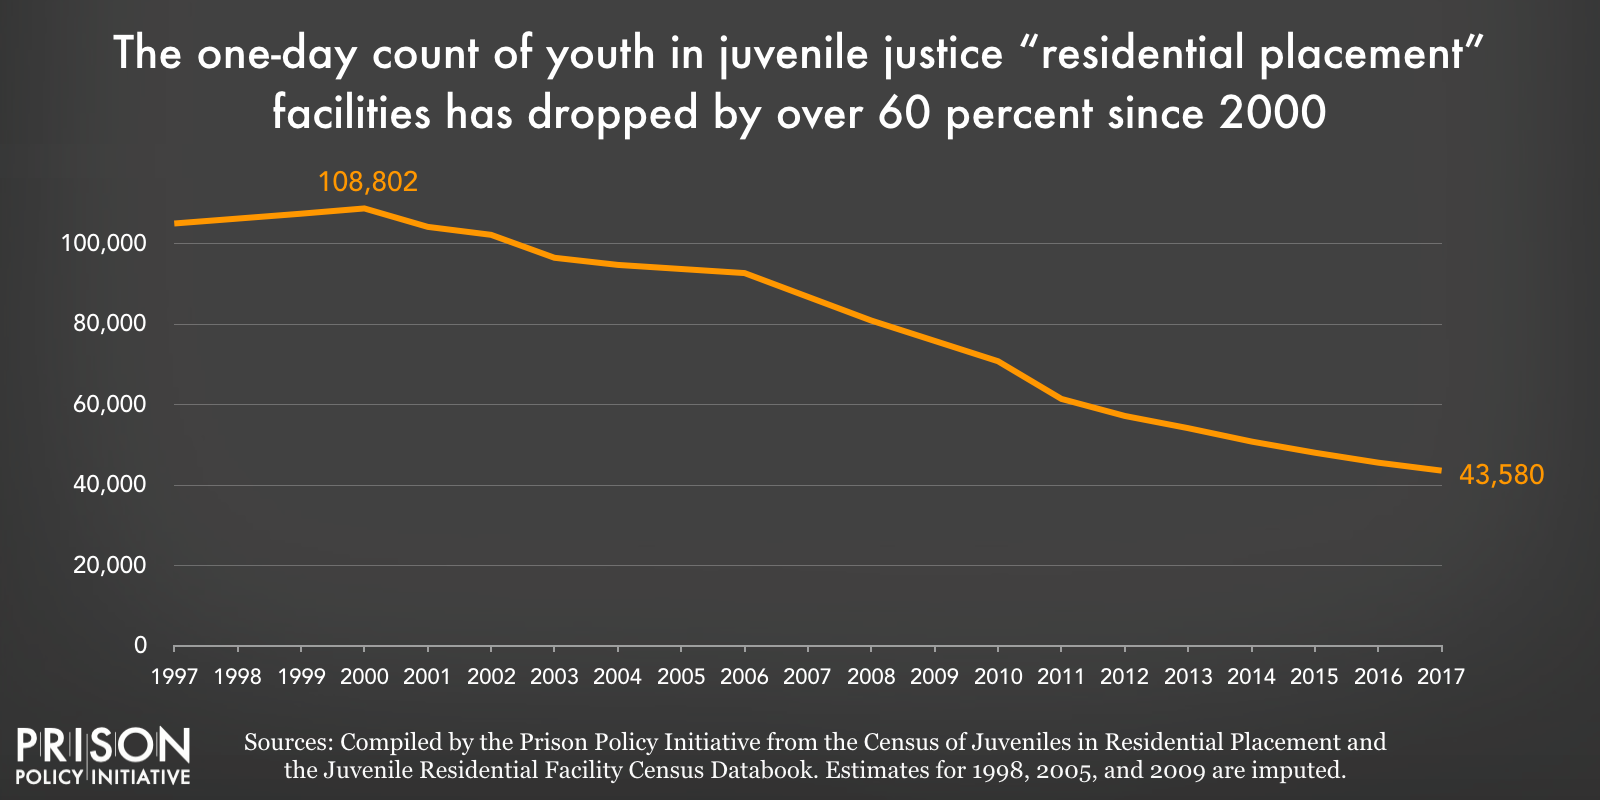 Chart showing that the one-day count of youth in juvenile justice residential placement facilities (not adult facilities) has dropped by over 60 percent since 2000.